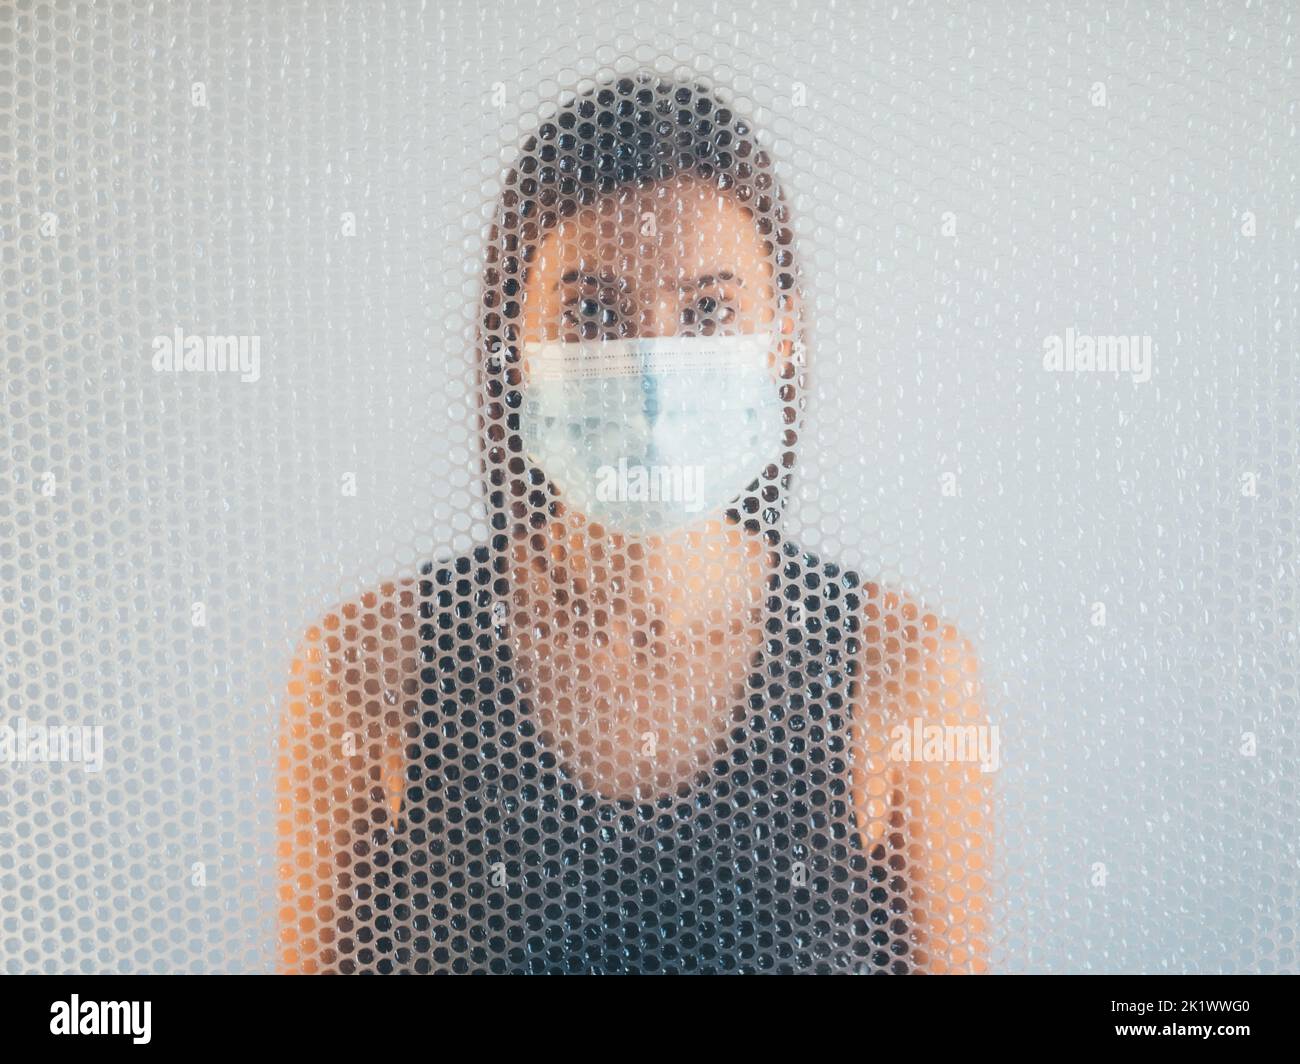 Air pollution. Defocused portrait. Respiratory disorder. Concerned woman in protective face mask behind transparent polyethylene bubble wrap texture d Stock Photo